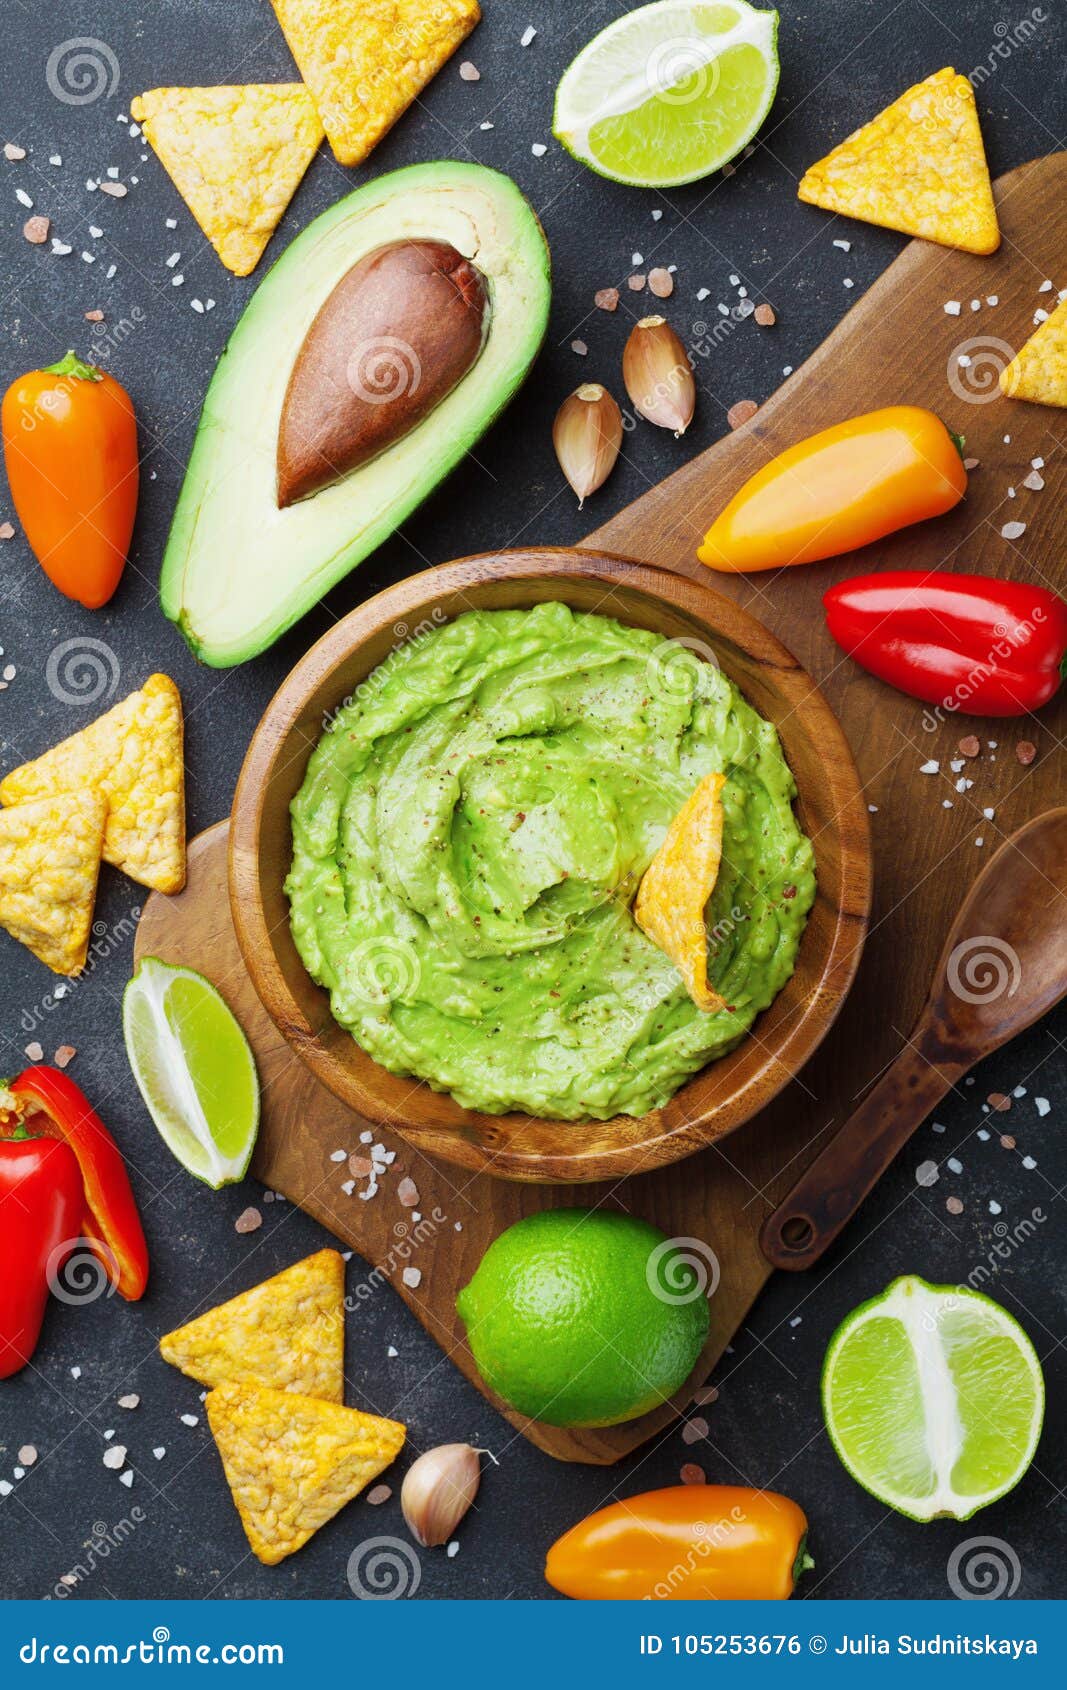 avocado guacamole with ingredients pepper, lime and nachos on black table top view. traditional mexican food.